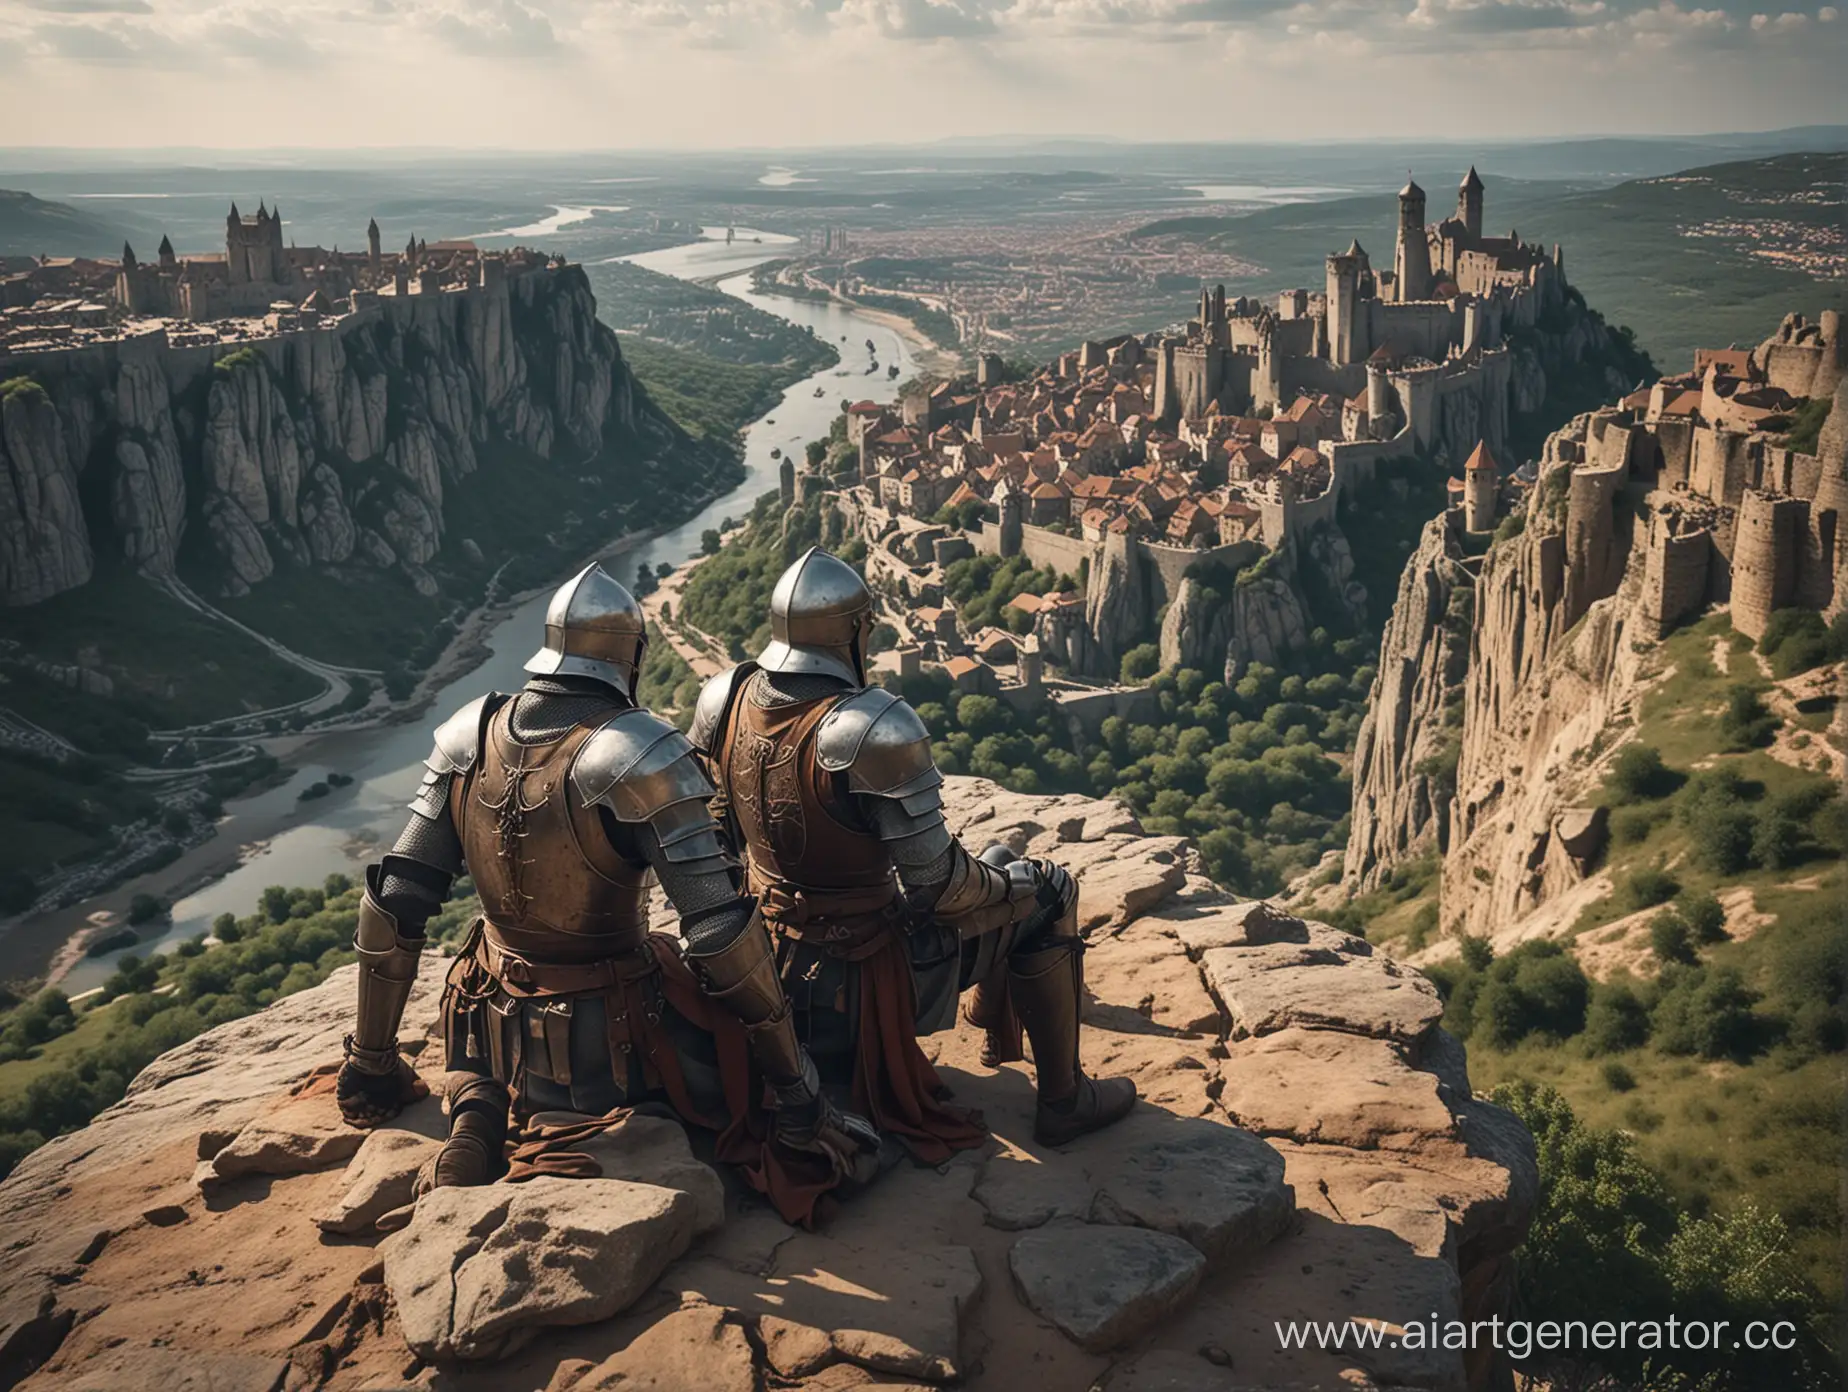 Majestic-Knights-Resting-on-Cliff-Overlooking-Medieval-City